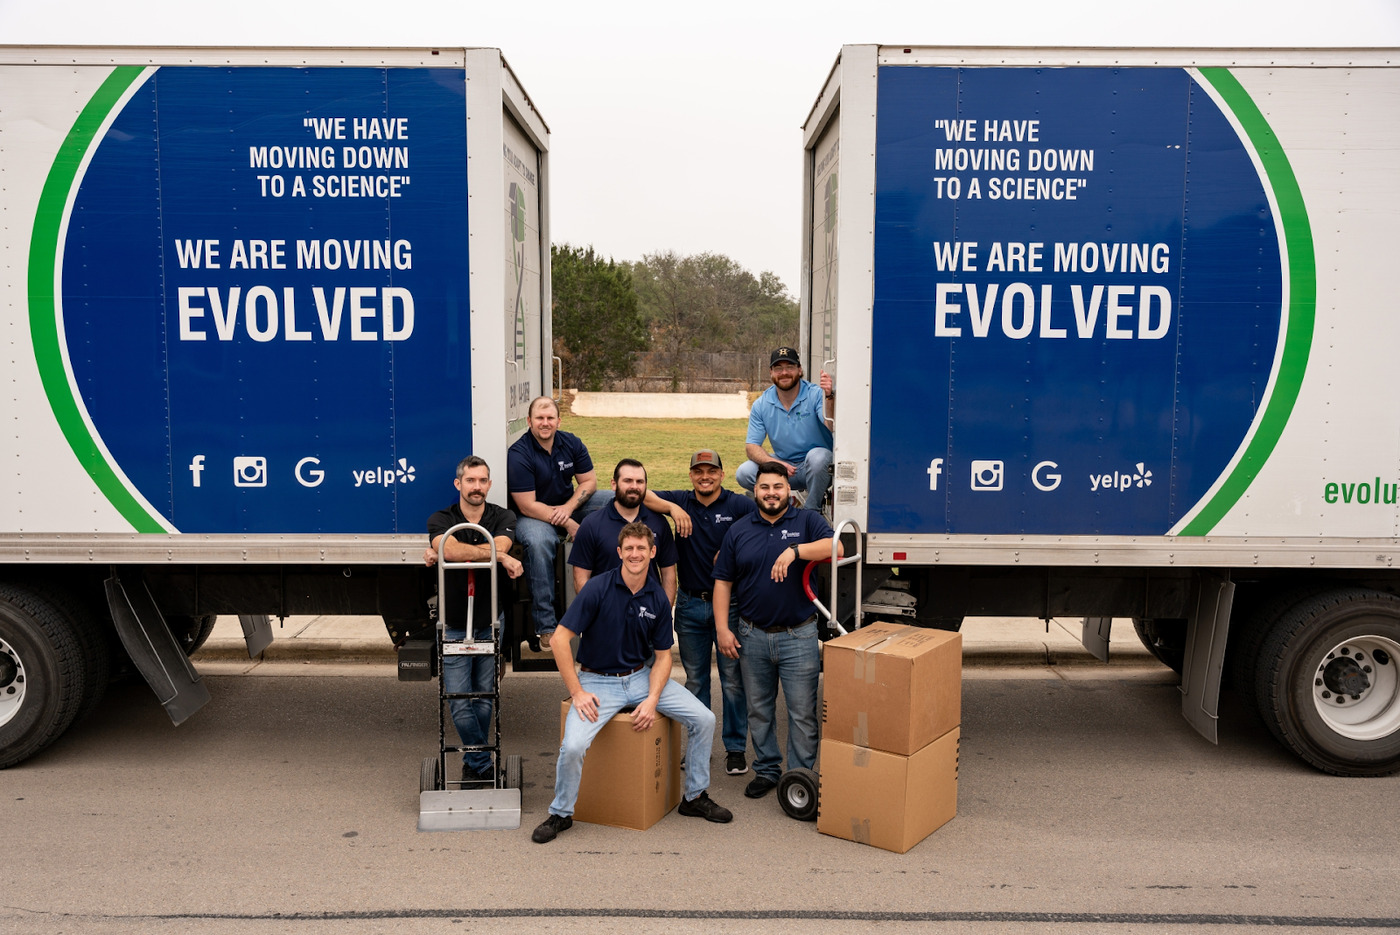 Evolution Moving Company offers comprehensive moving services, including residential moves, piano moving, and more, to meet the demands of modern relocating families.